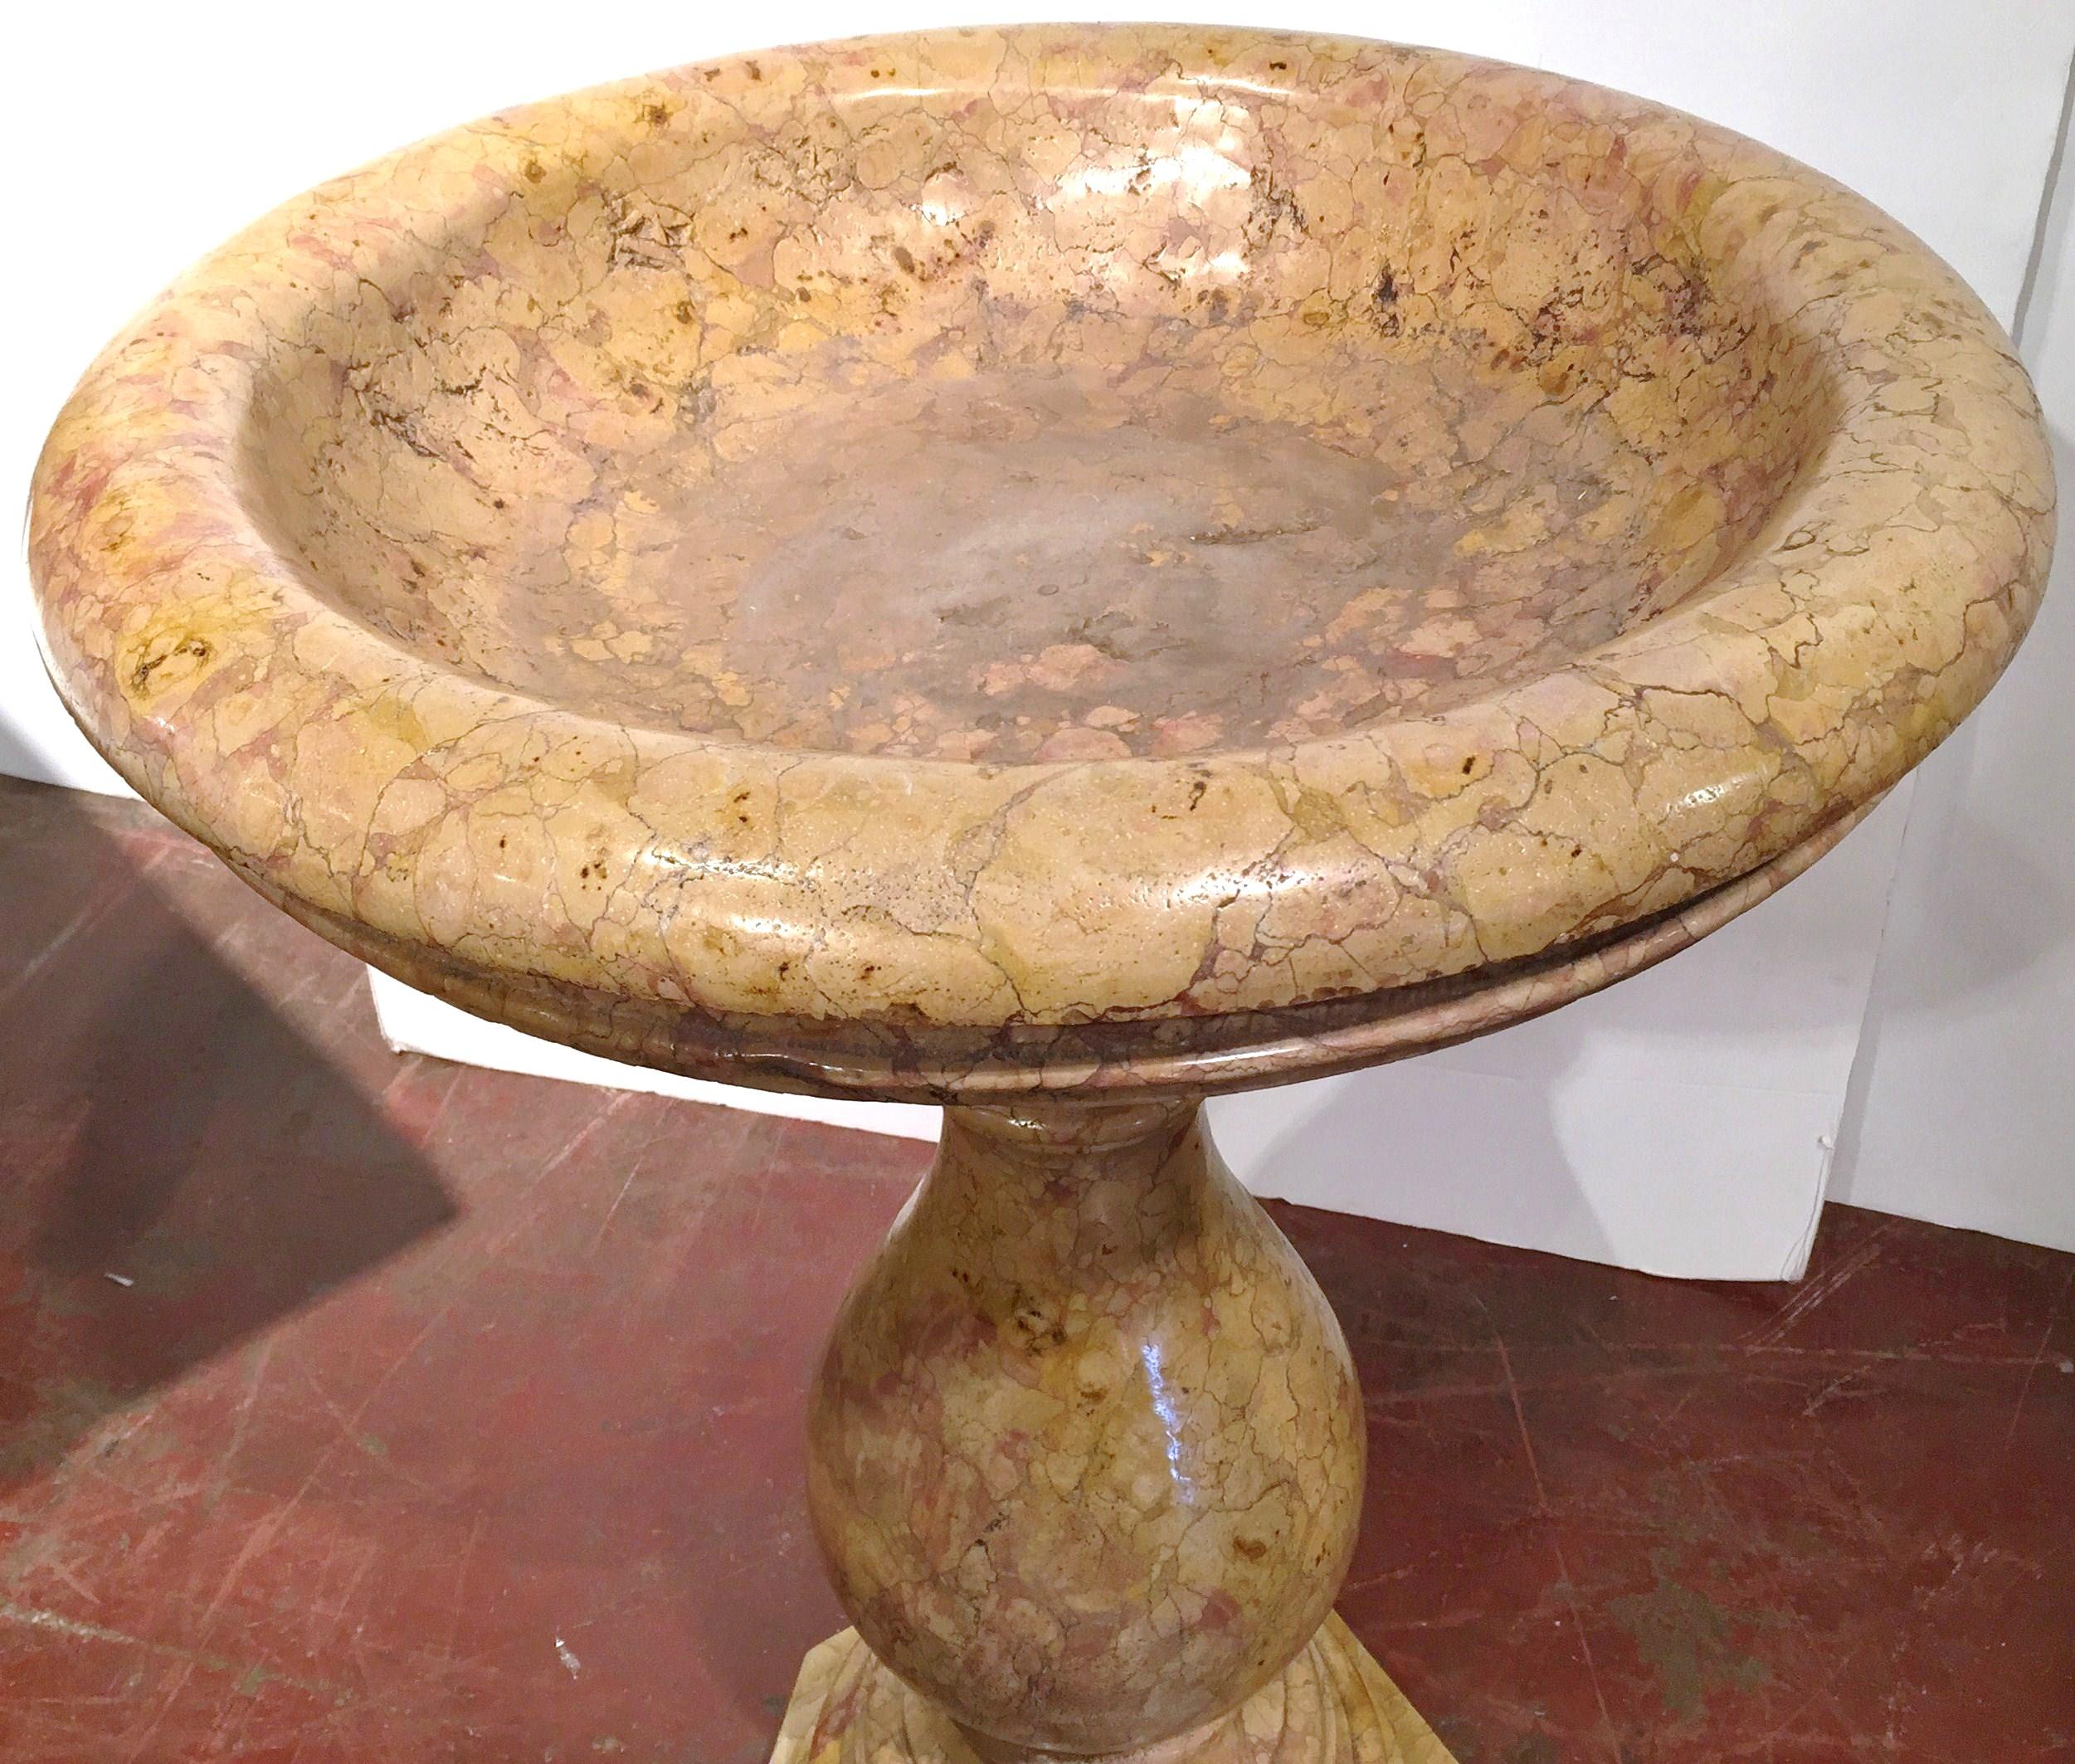 This large antique two-piece marble stand with bowl was crafted in Italy, circa 1920. The classical, Roman style jardinière sits on a carved pedestal base and is dressed with a wide swivel basin which could hold any kind of greenery. The elegant